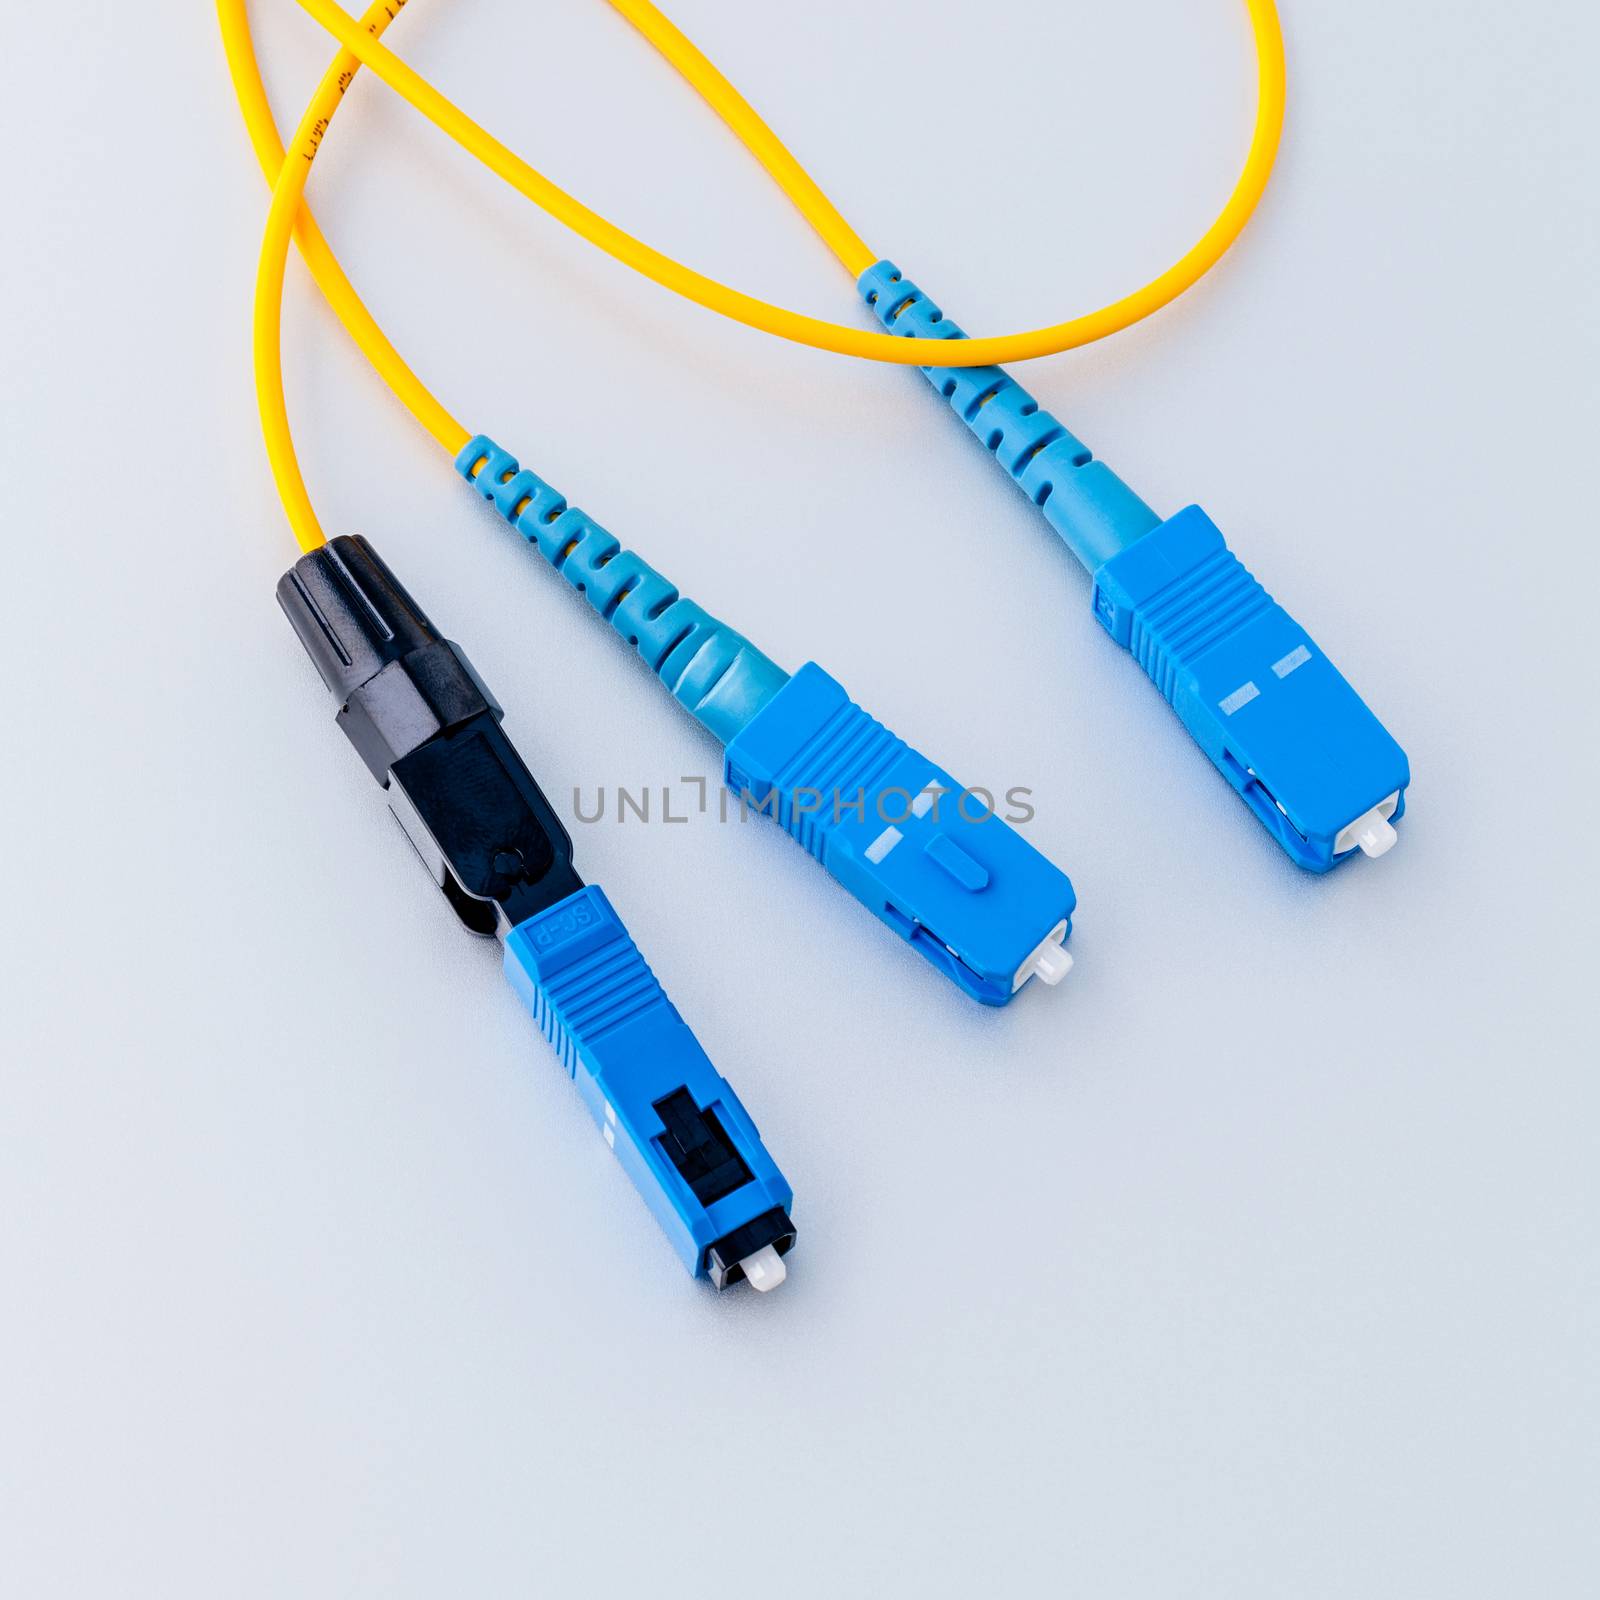 Fiber Optics connectors symbolic photo for fast internet connection ,Internet Service Provider equipment.broadband connection is  available everywhere.